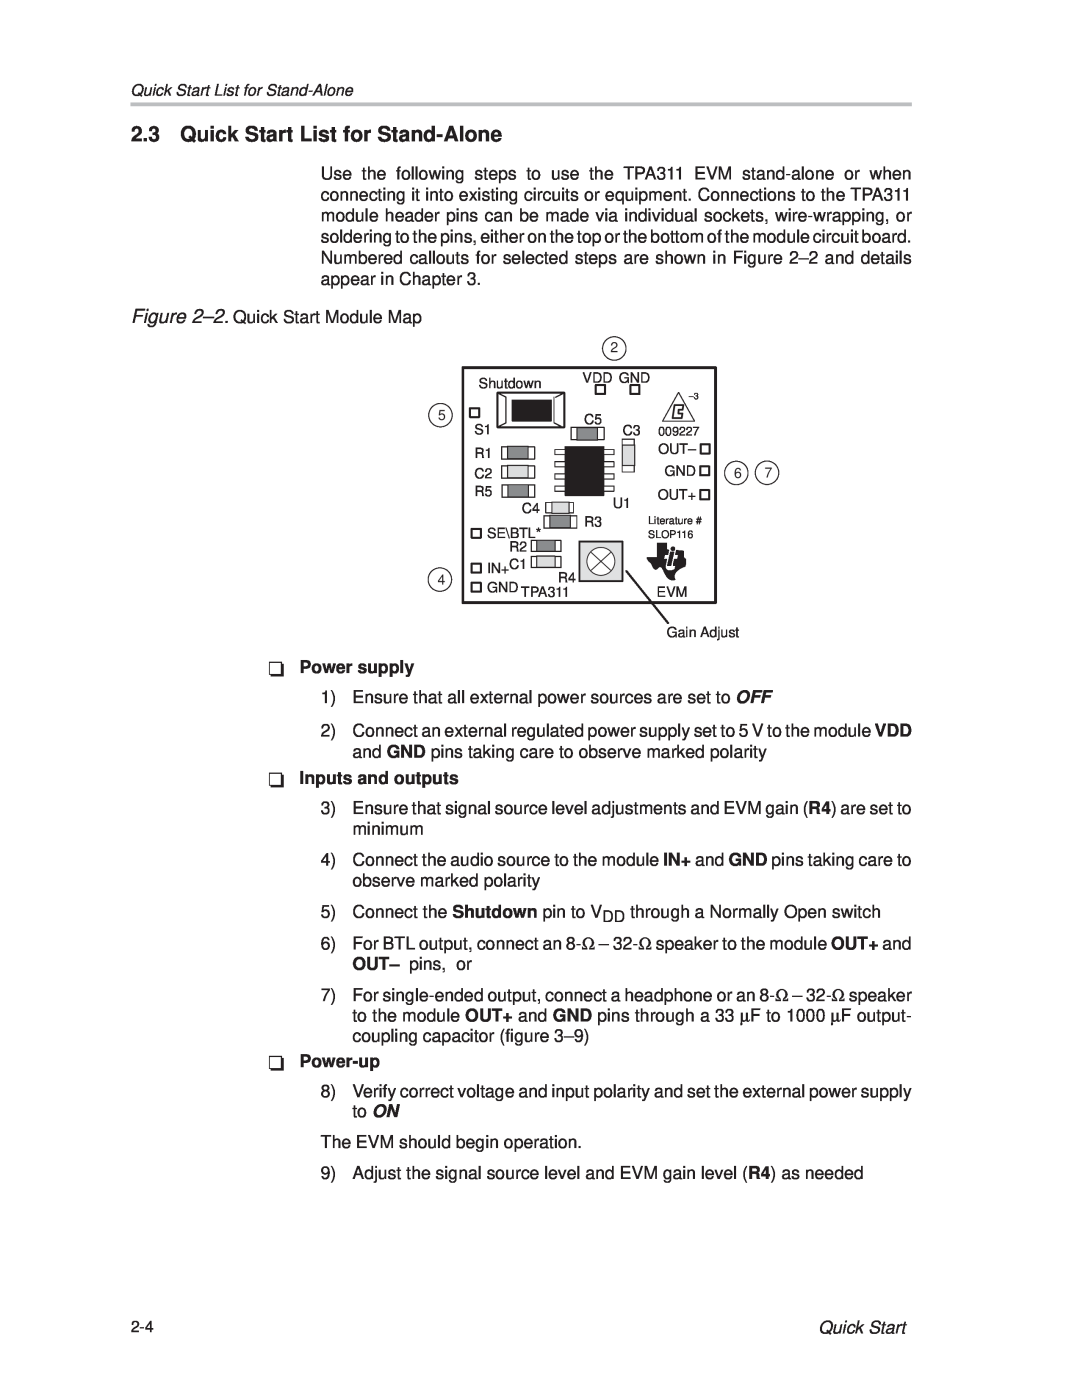 Texas Instruments TPA 311 manual Quick Start List for Stand-Alone 